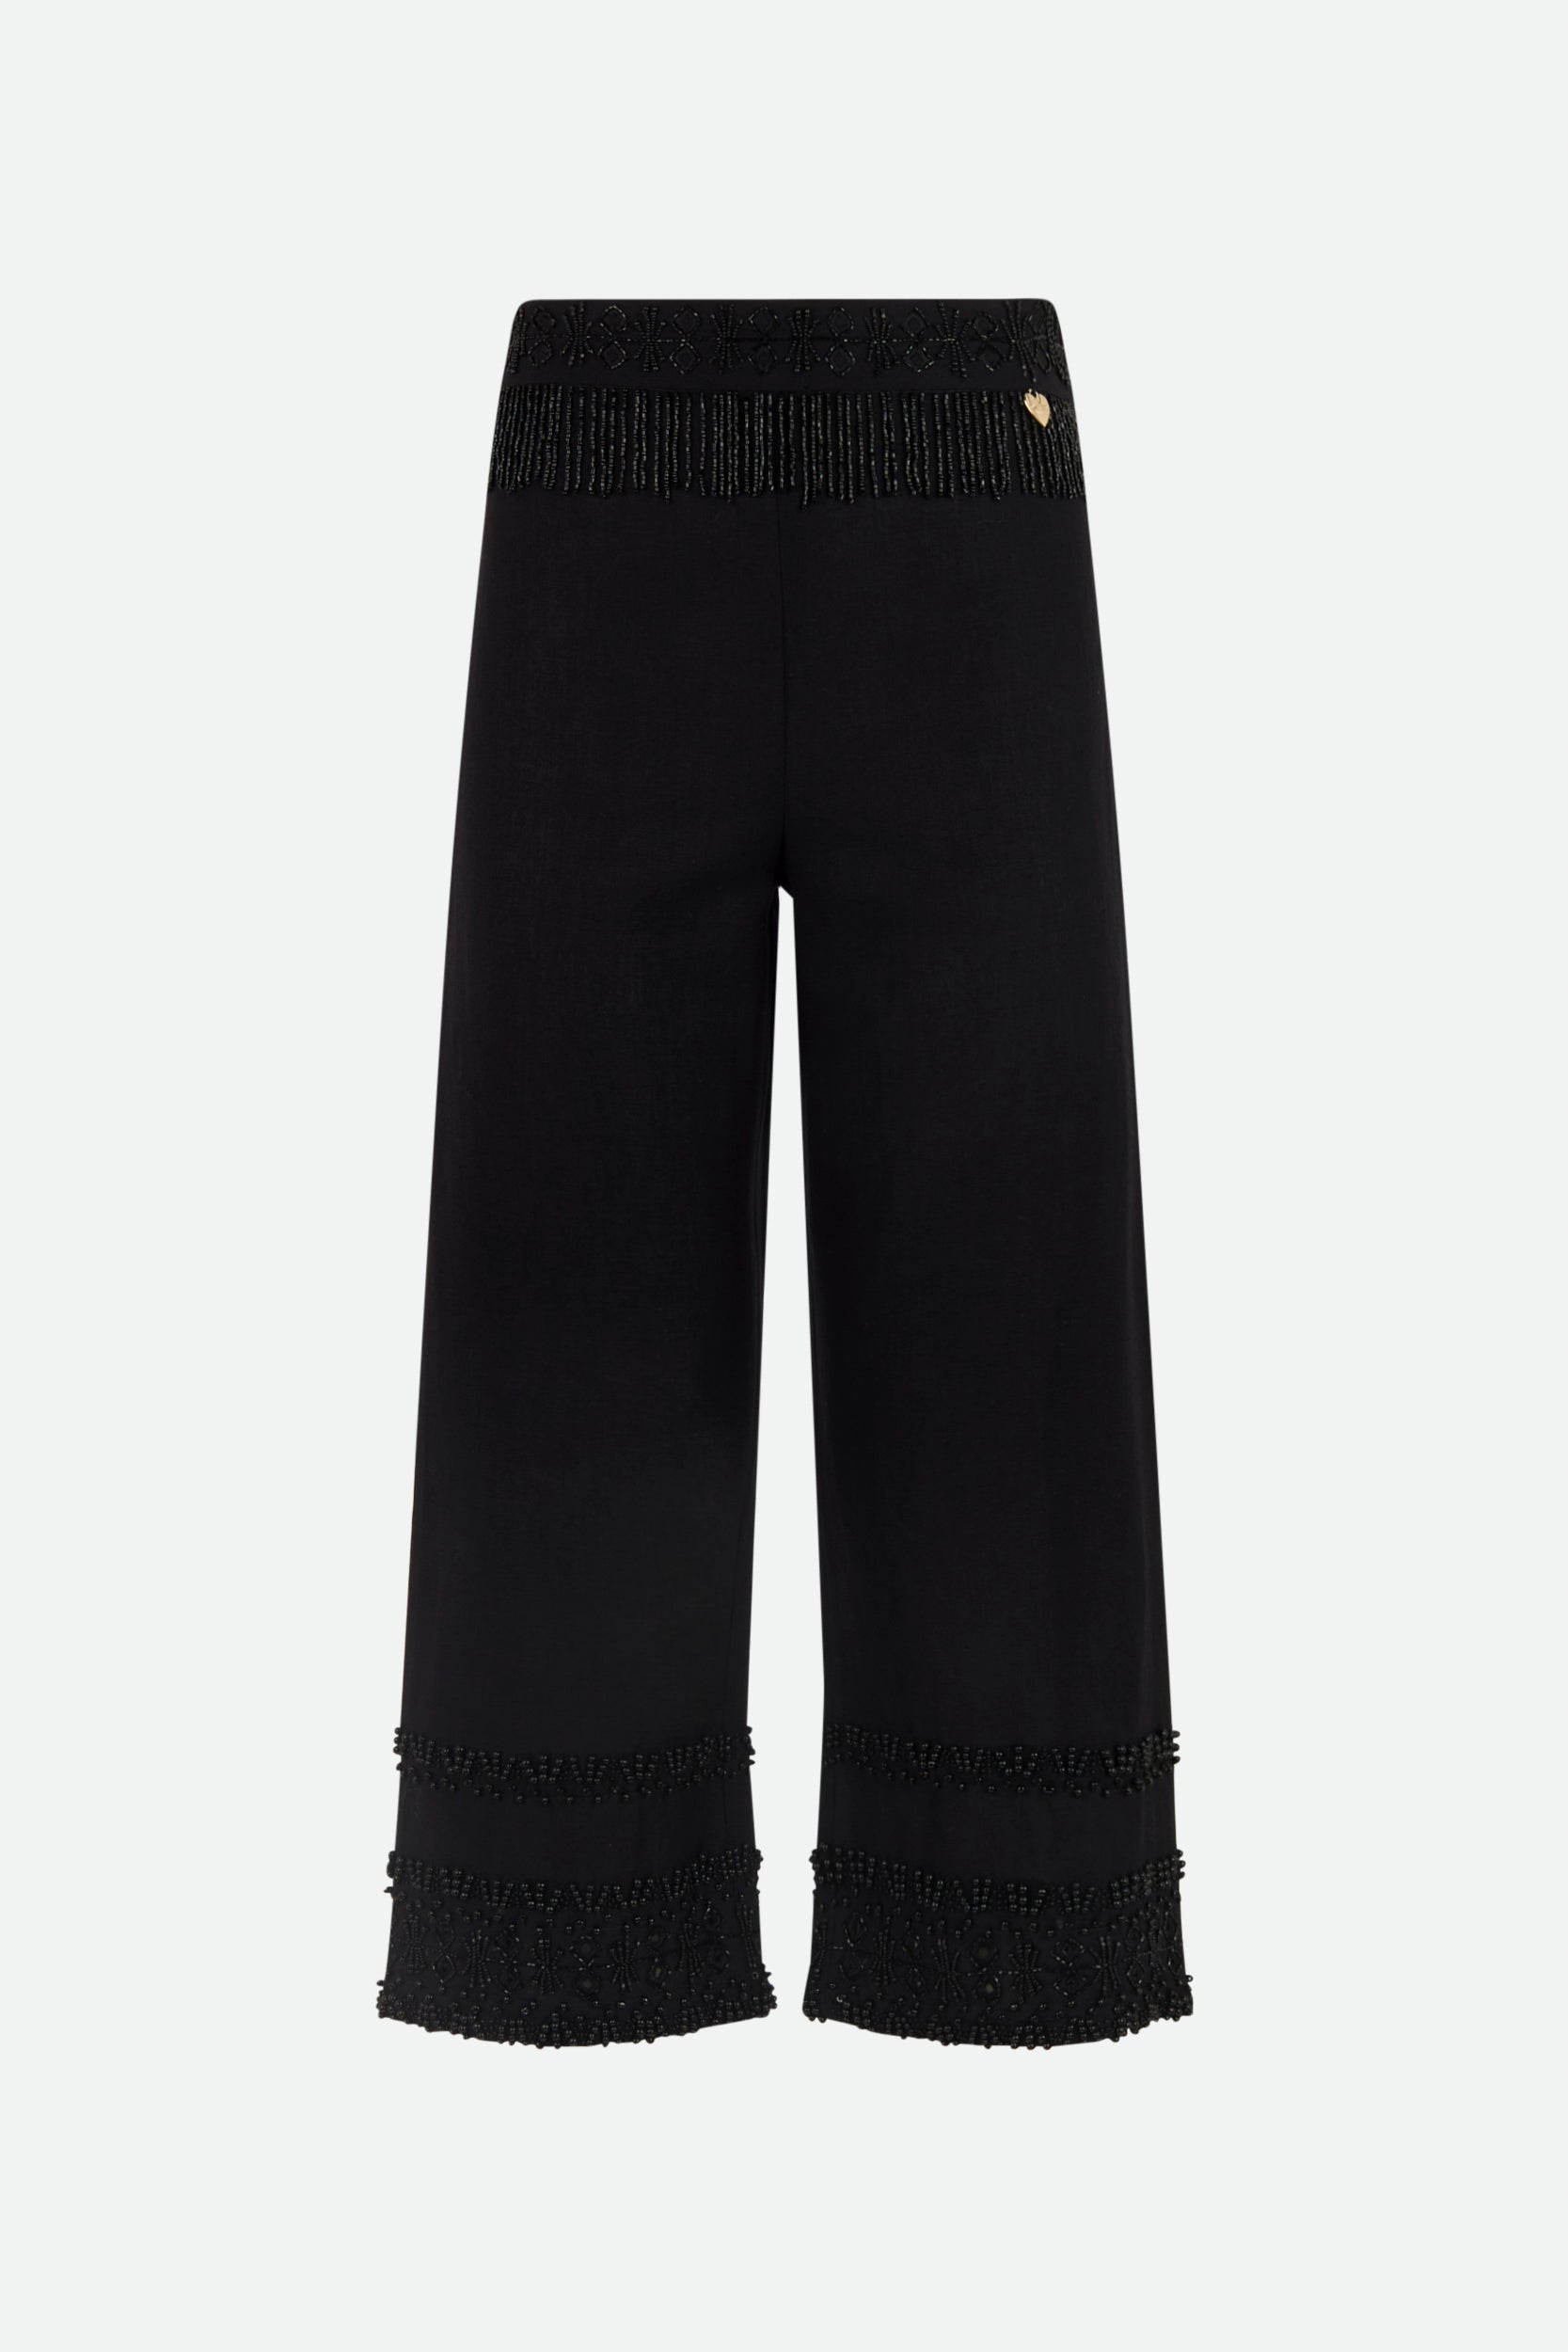 Twinset Black Cropped Trousers